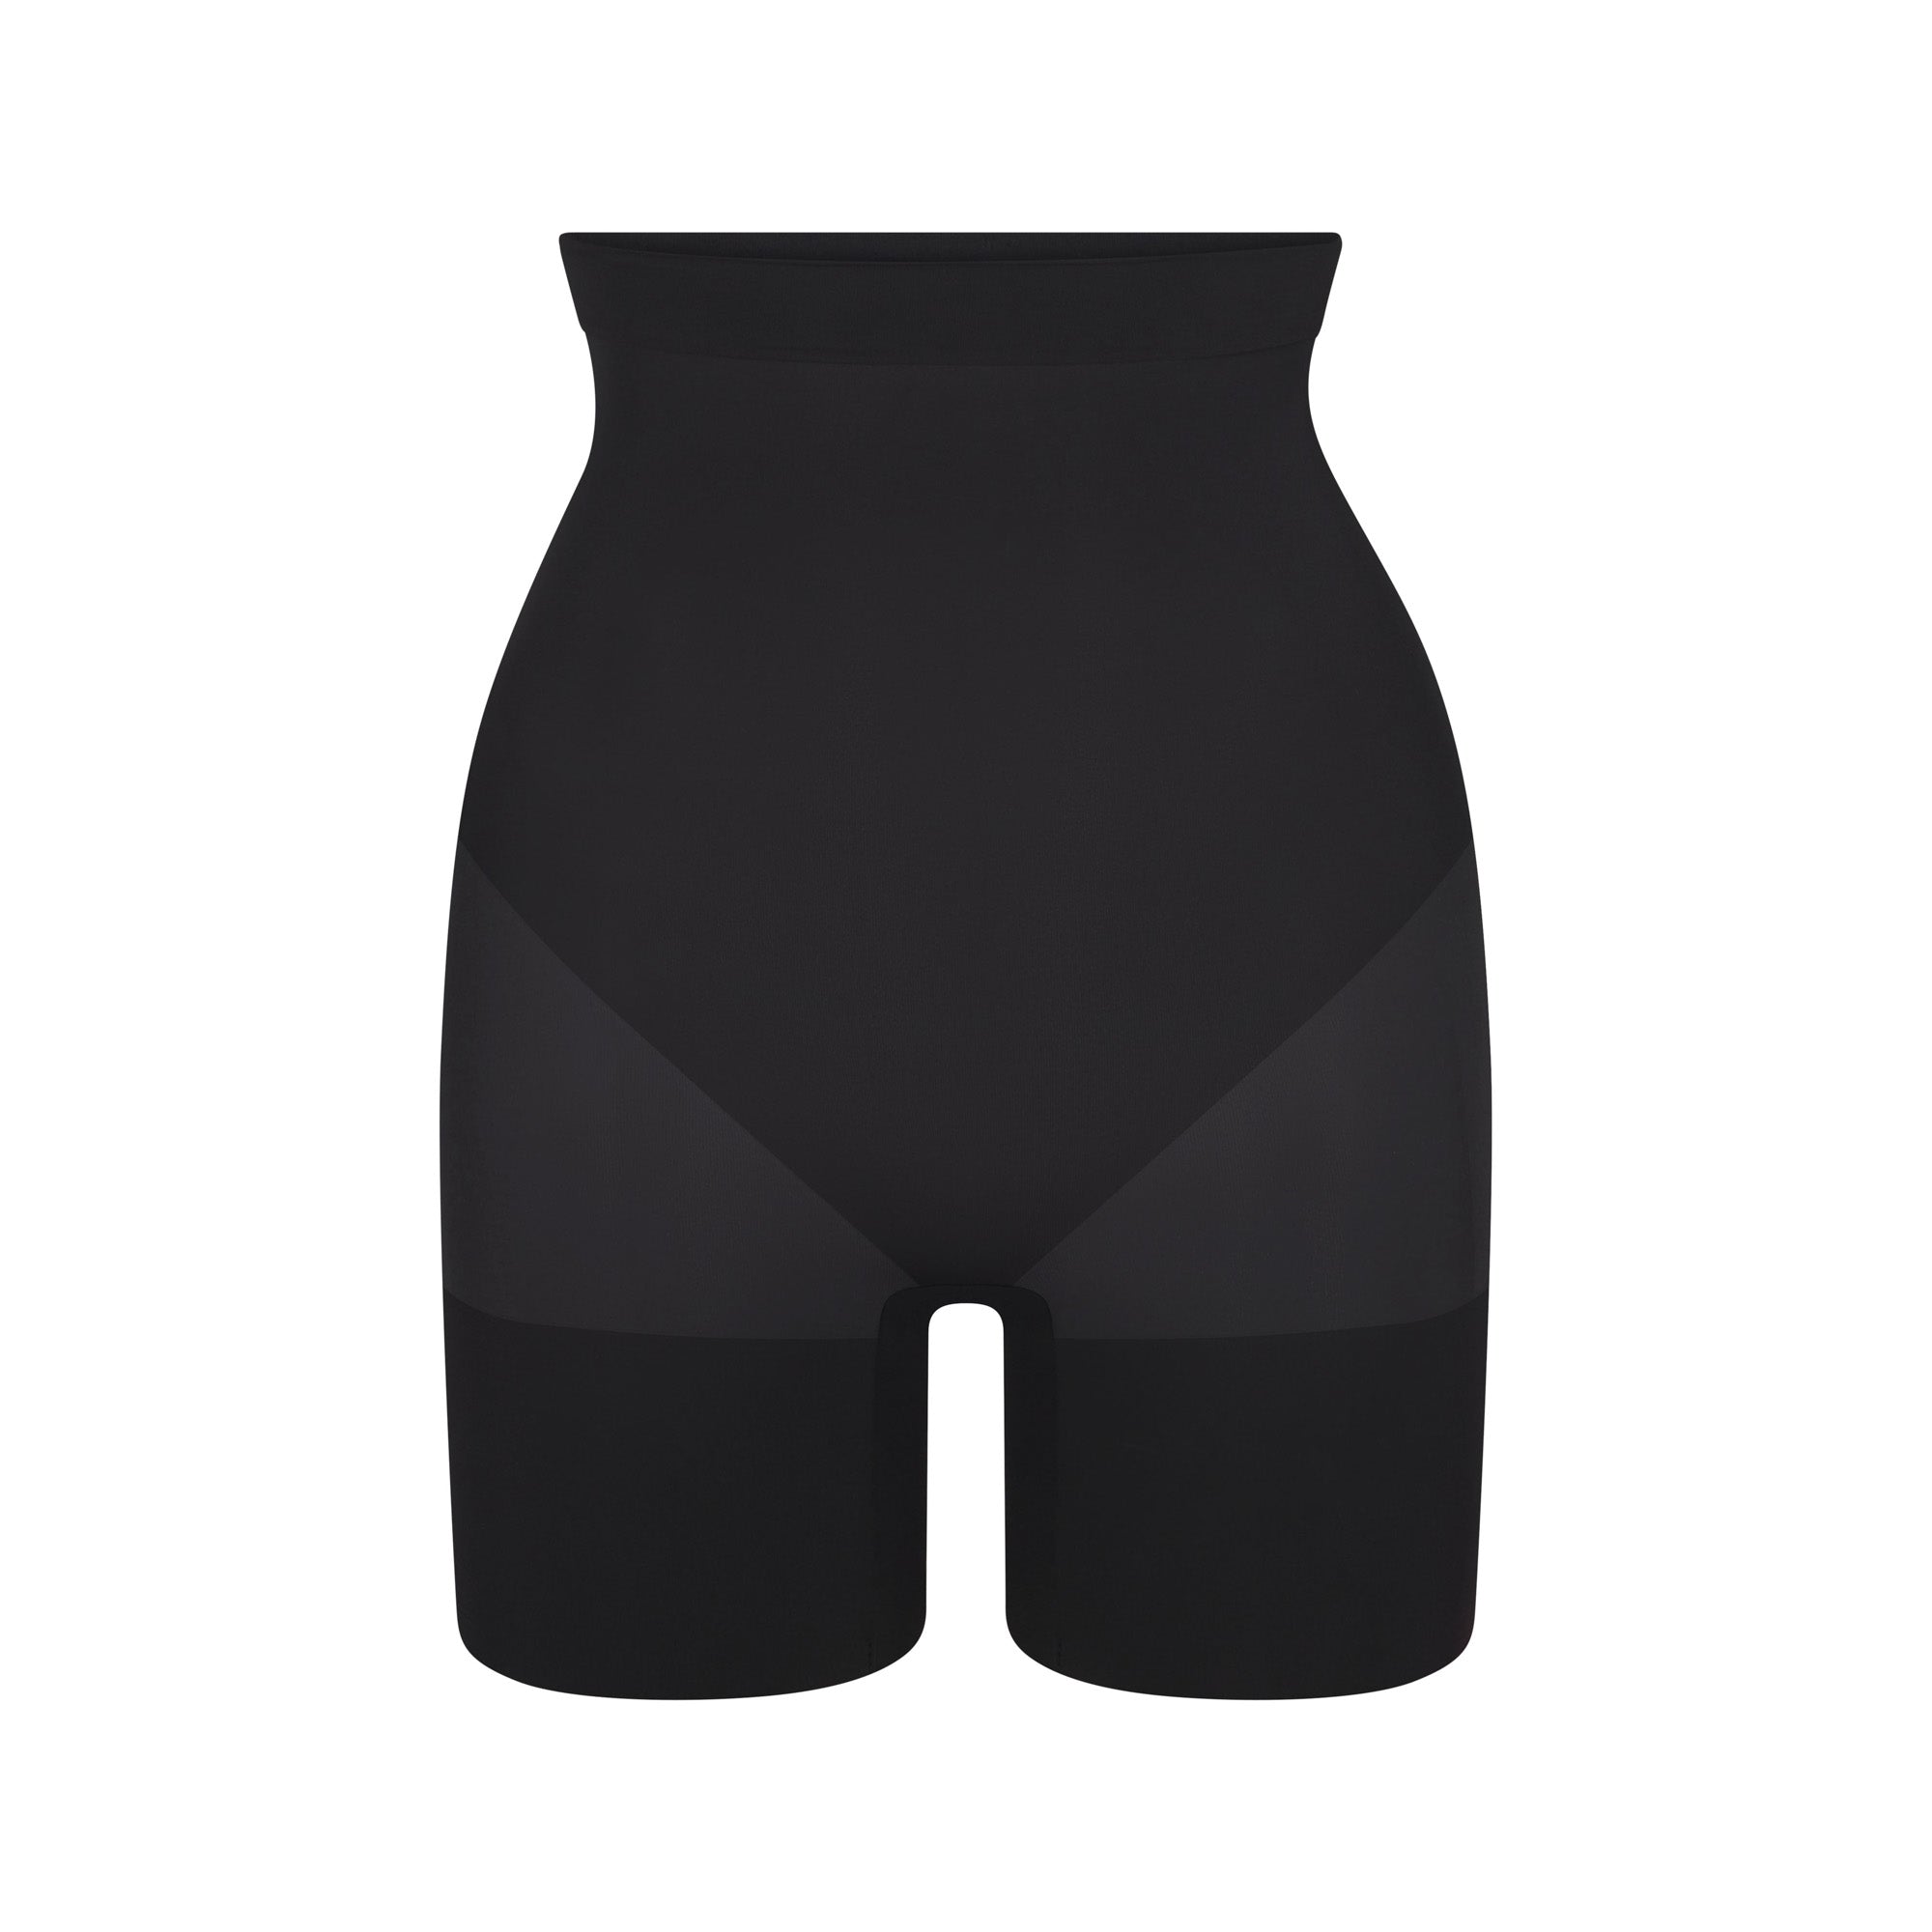 Thigh Shapewear for Women Tummy Control High Waist Seamless Shorts Black at   Women's Clothing store